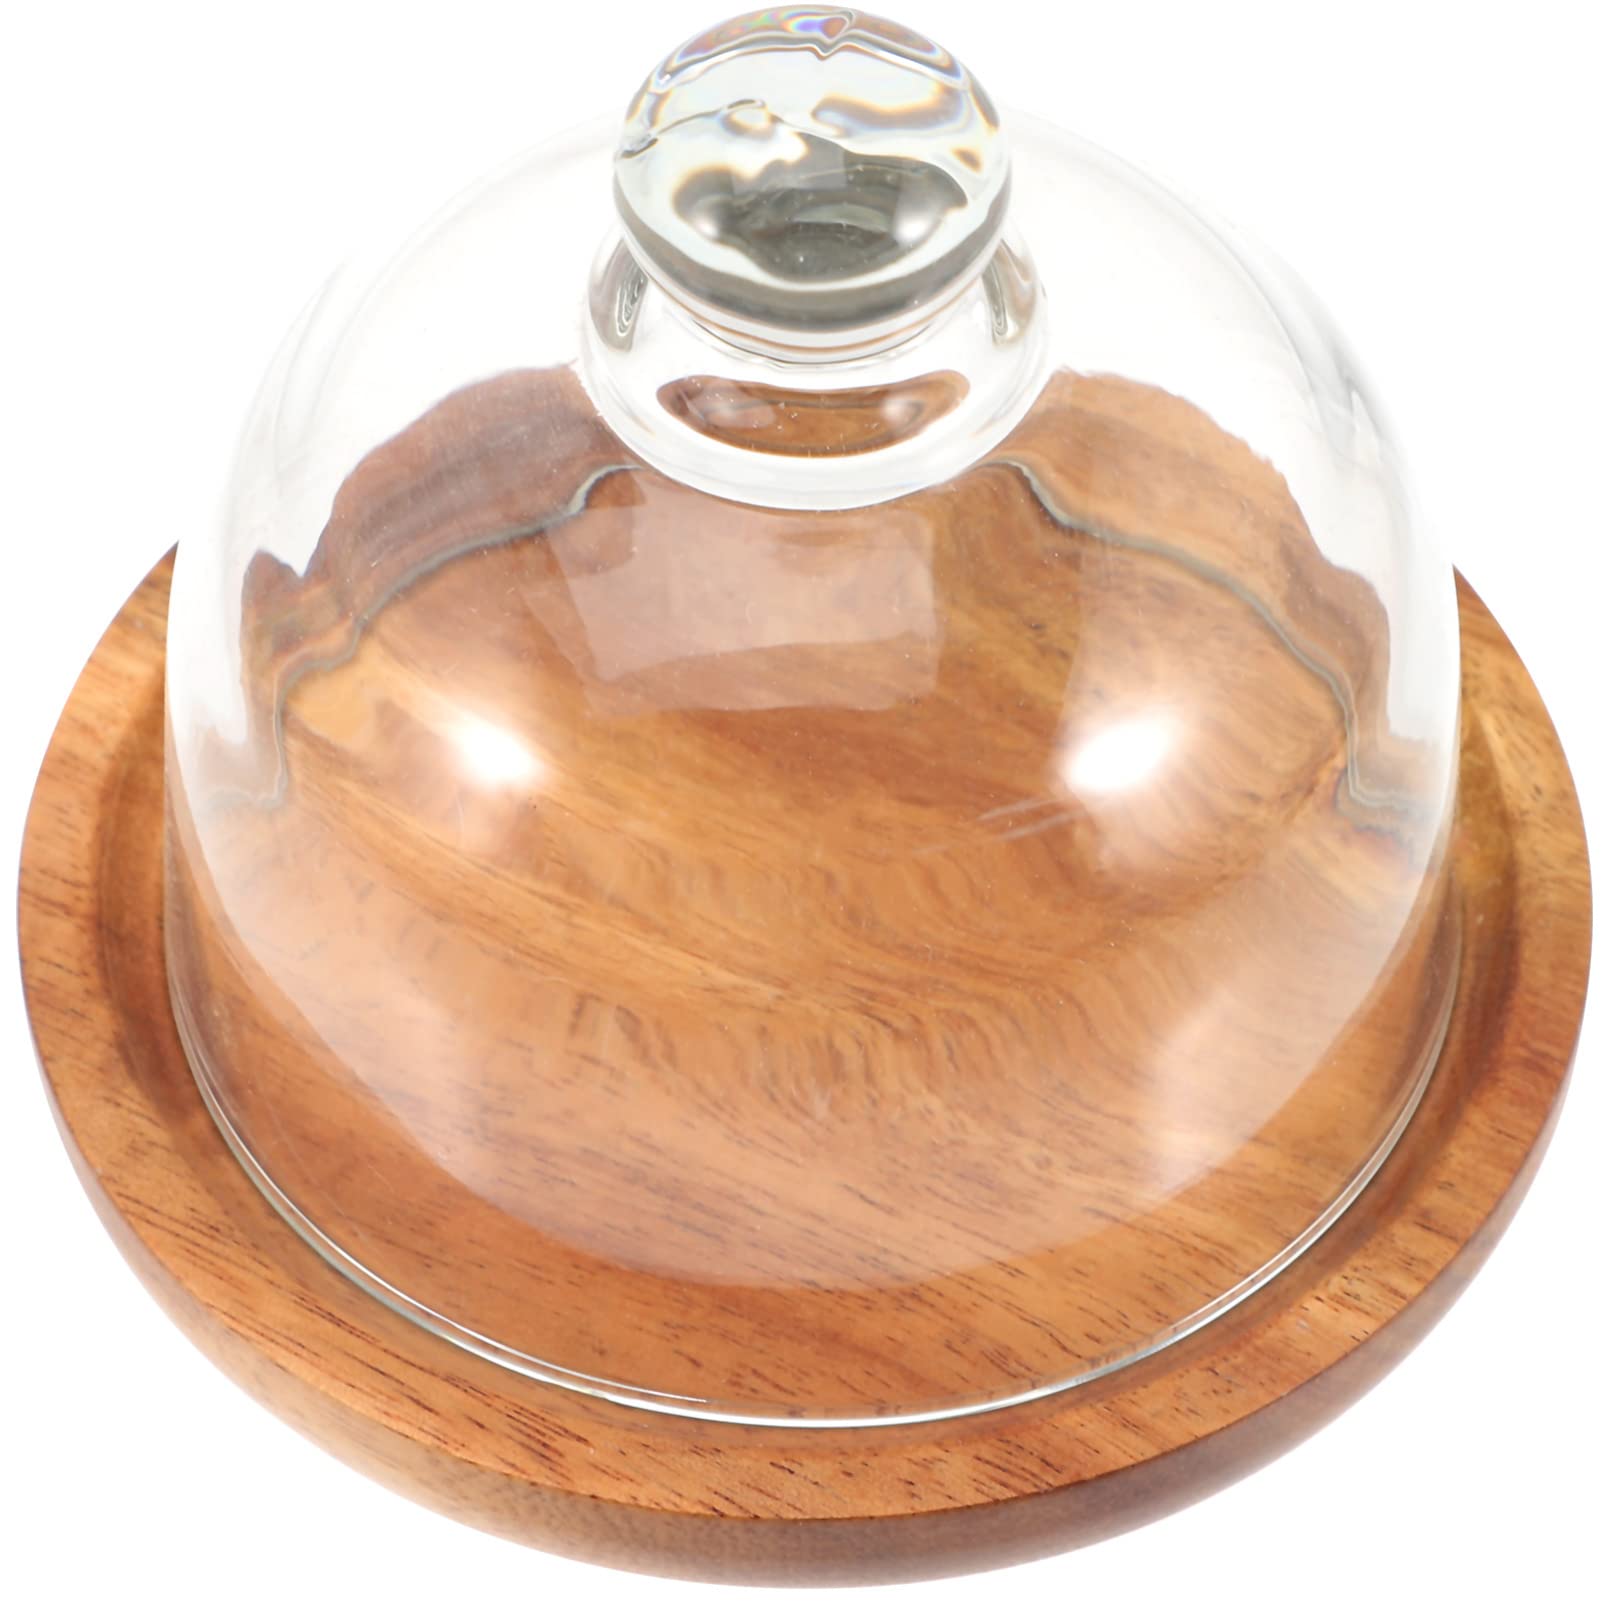 OUNONA Glass Cake Pan Cake Cover Wood Cake Stand with Dome Glass Cake Dome Cover Cheese Cloche Dome Glass Flower Cover Glass Cake Stand Dessert Display Cover Wooden Paper Cup Bracket